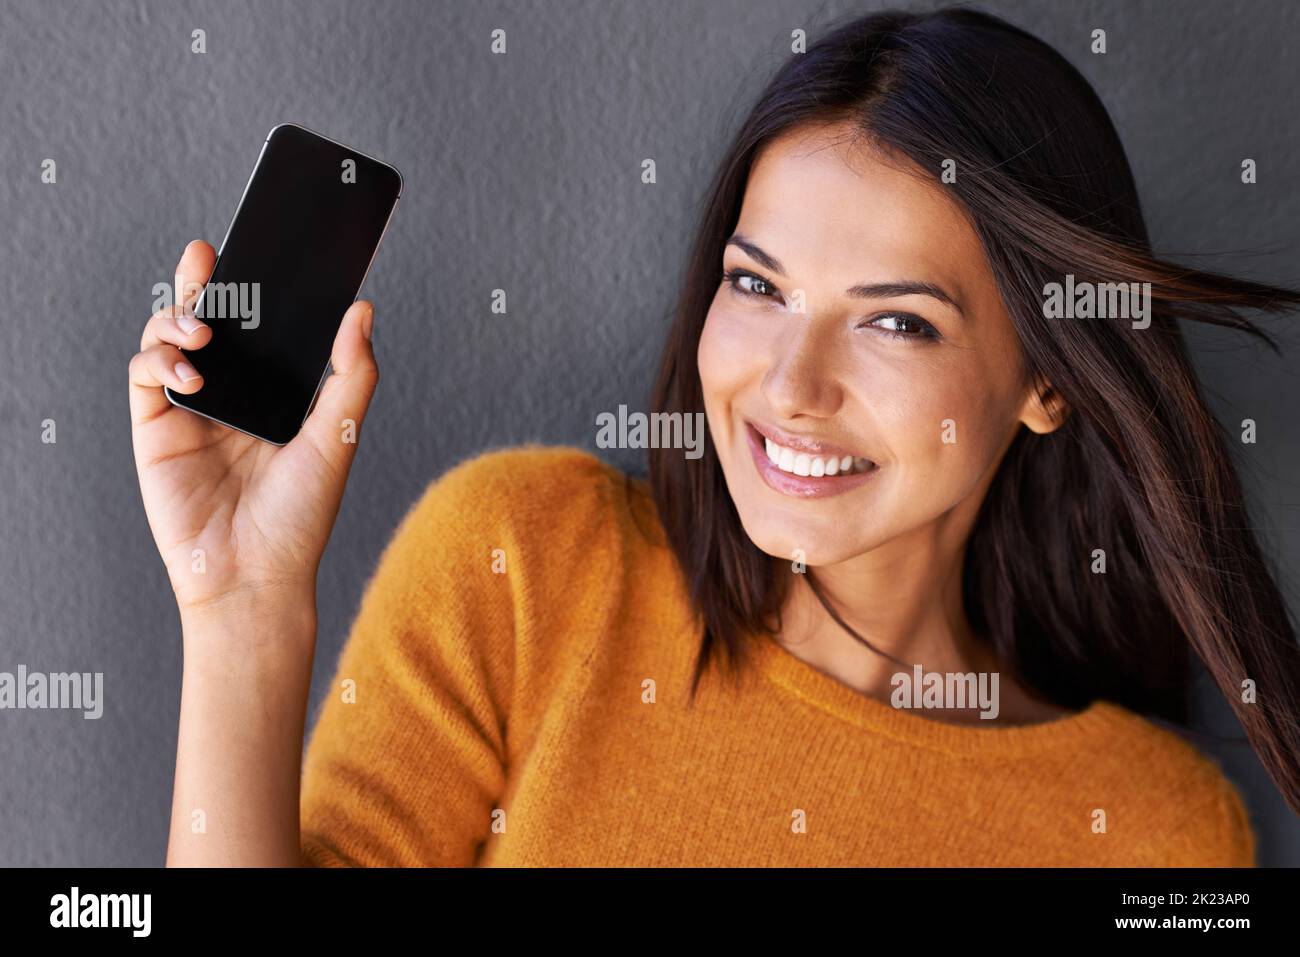 This makes staying connected easier. Closeup portrait of an attractive young woman holding up a mobile phone. Stock Photo